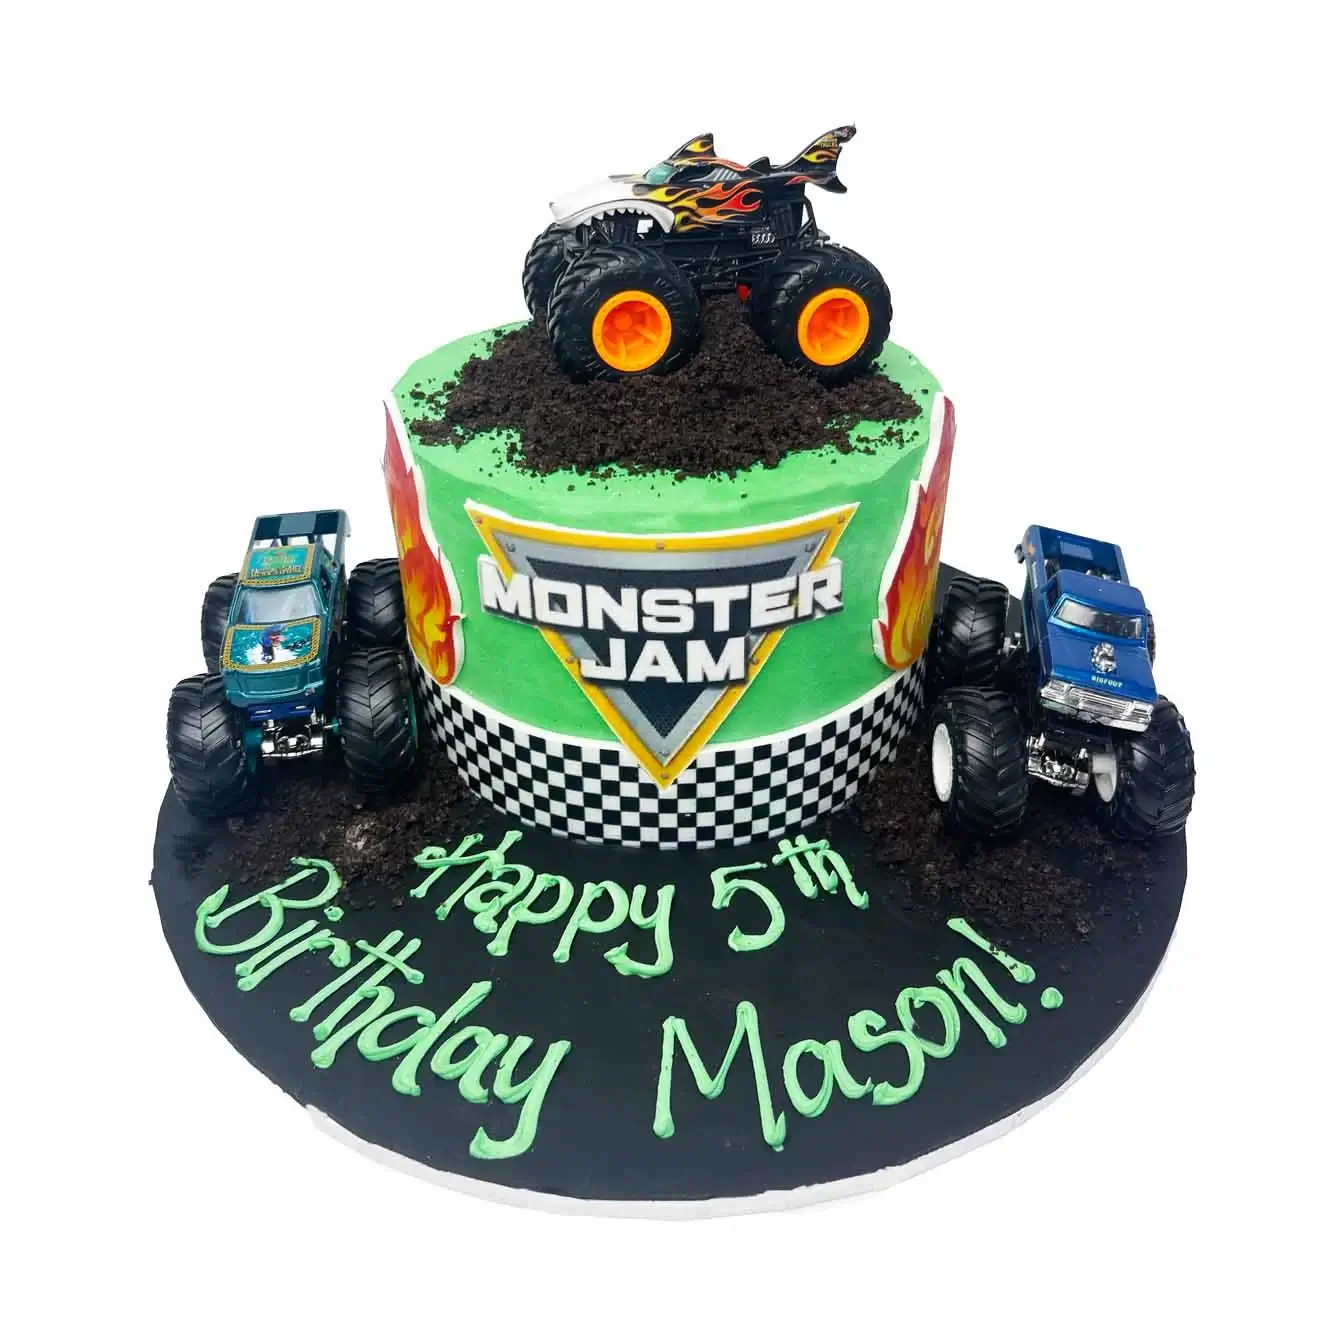 Monster Jam Cake - A cake with three Hot Wheels monster trucks on a bed of Oreo dirt, a dynamic centerpiece for birthdays and celebrations filled with high-octane adventure.